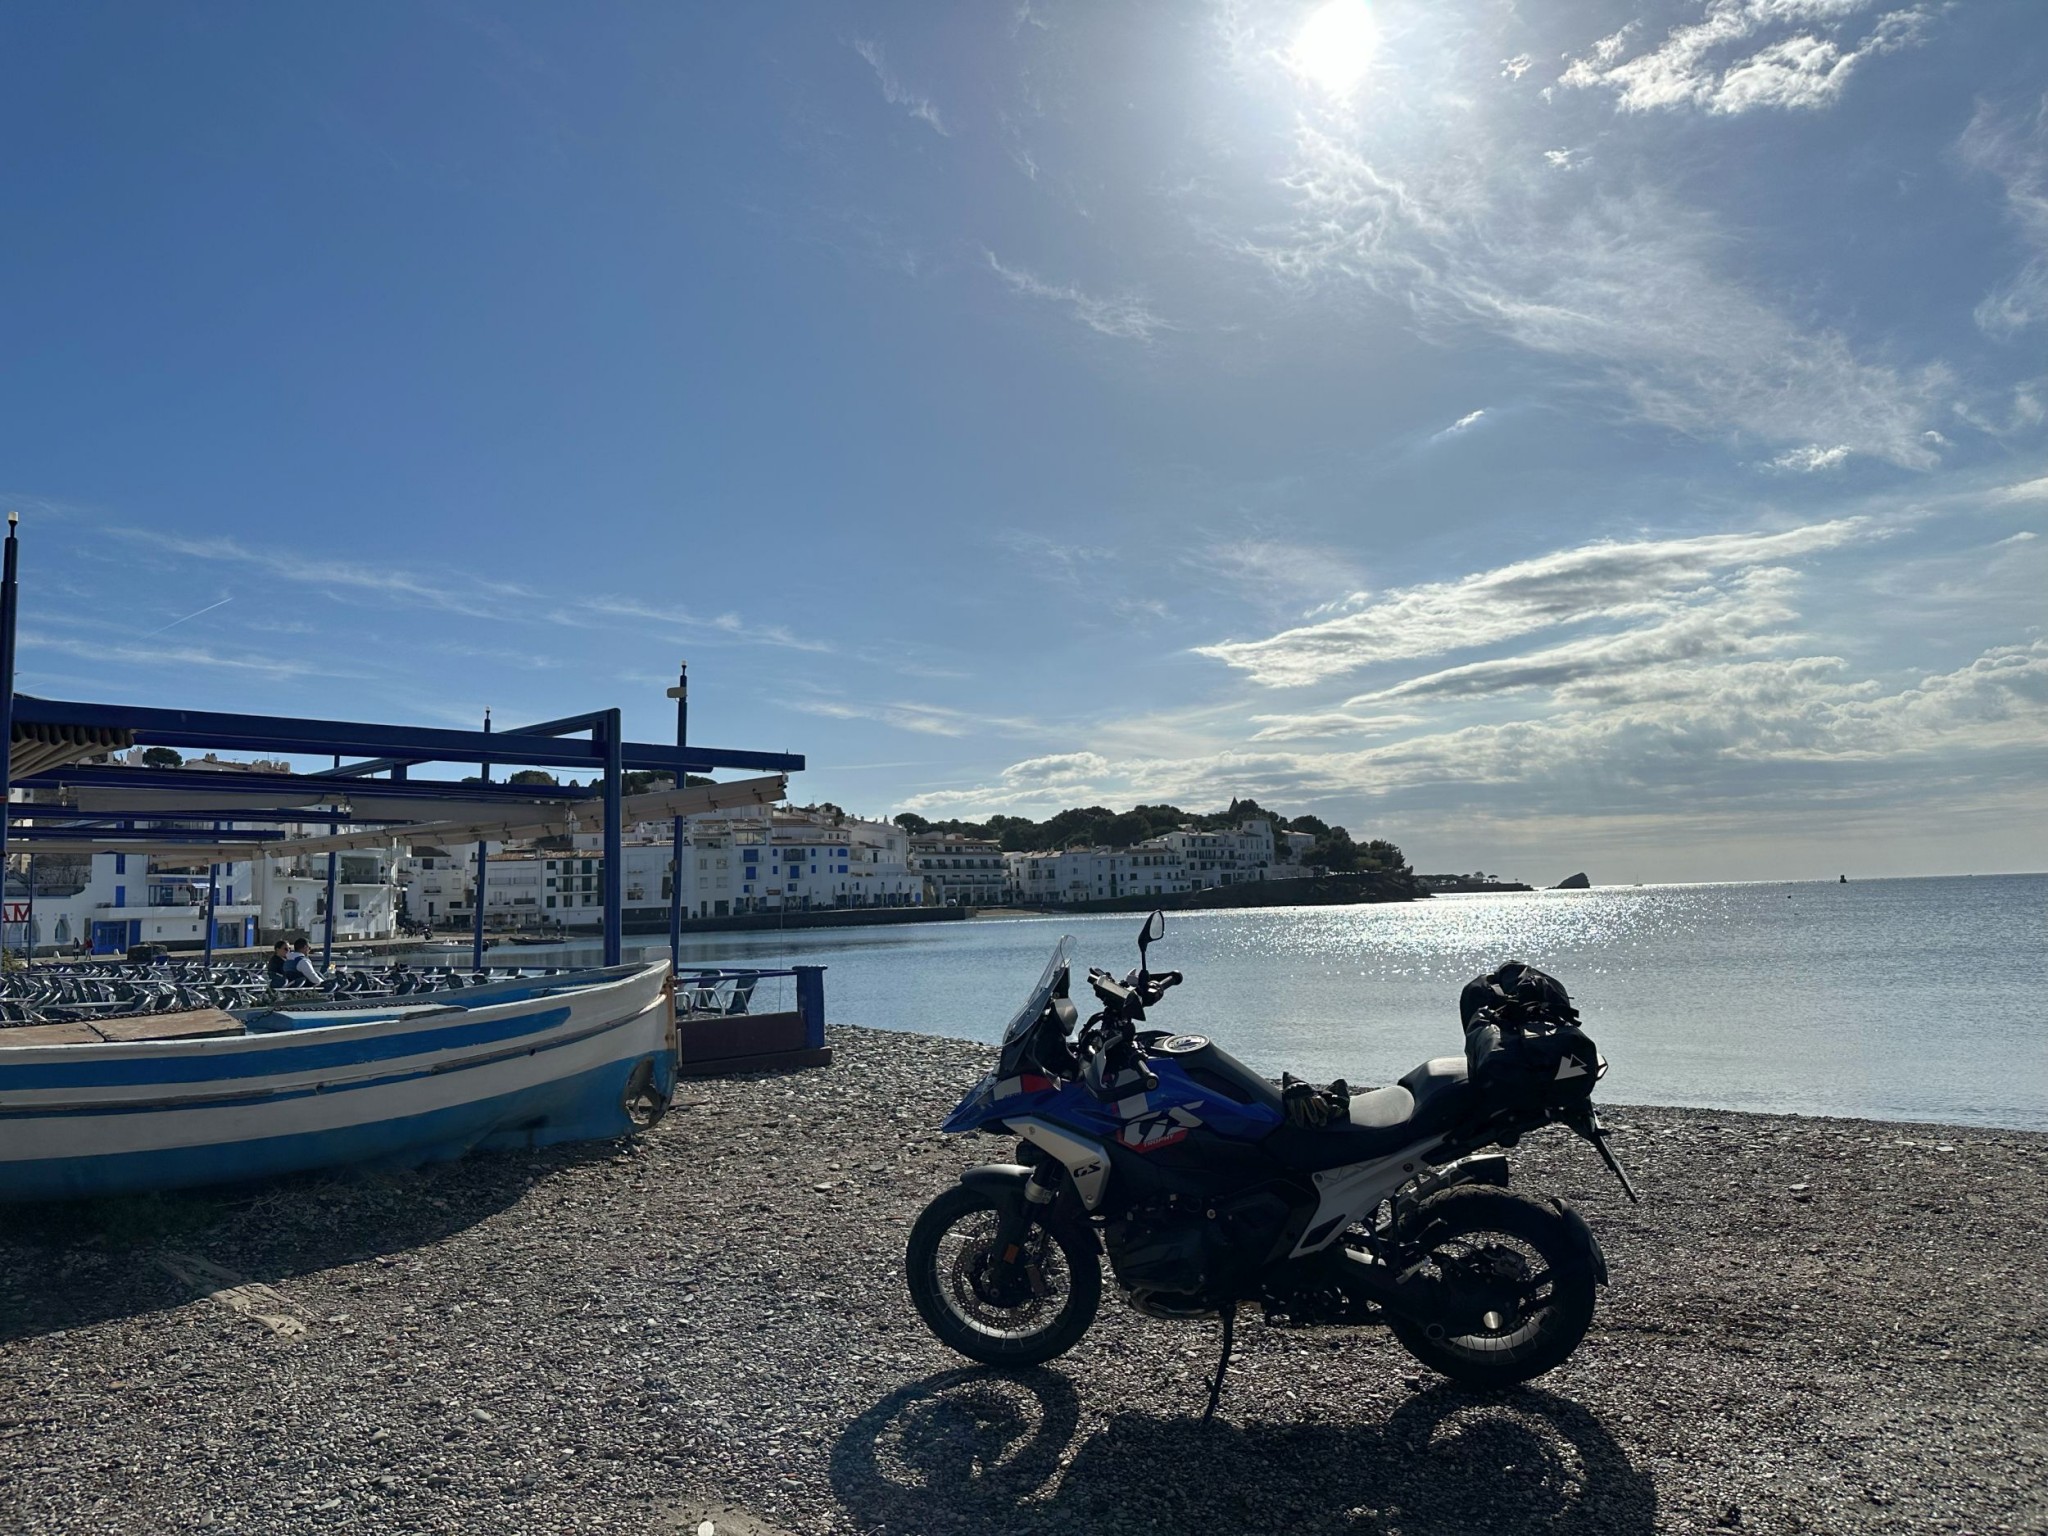 BMW R 1300 GS road test - from Barcelona to Vienna - Image 2